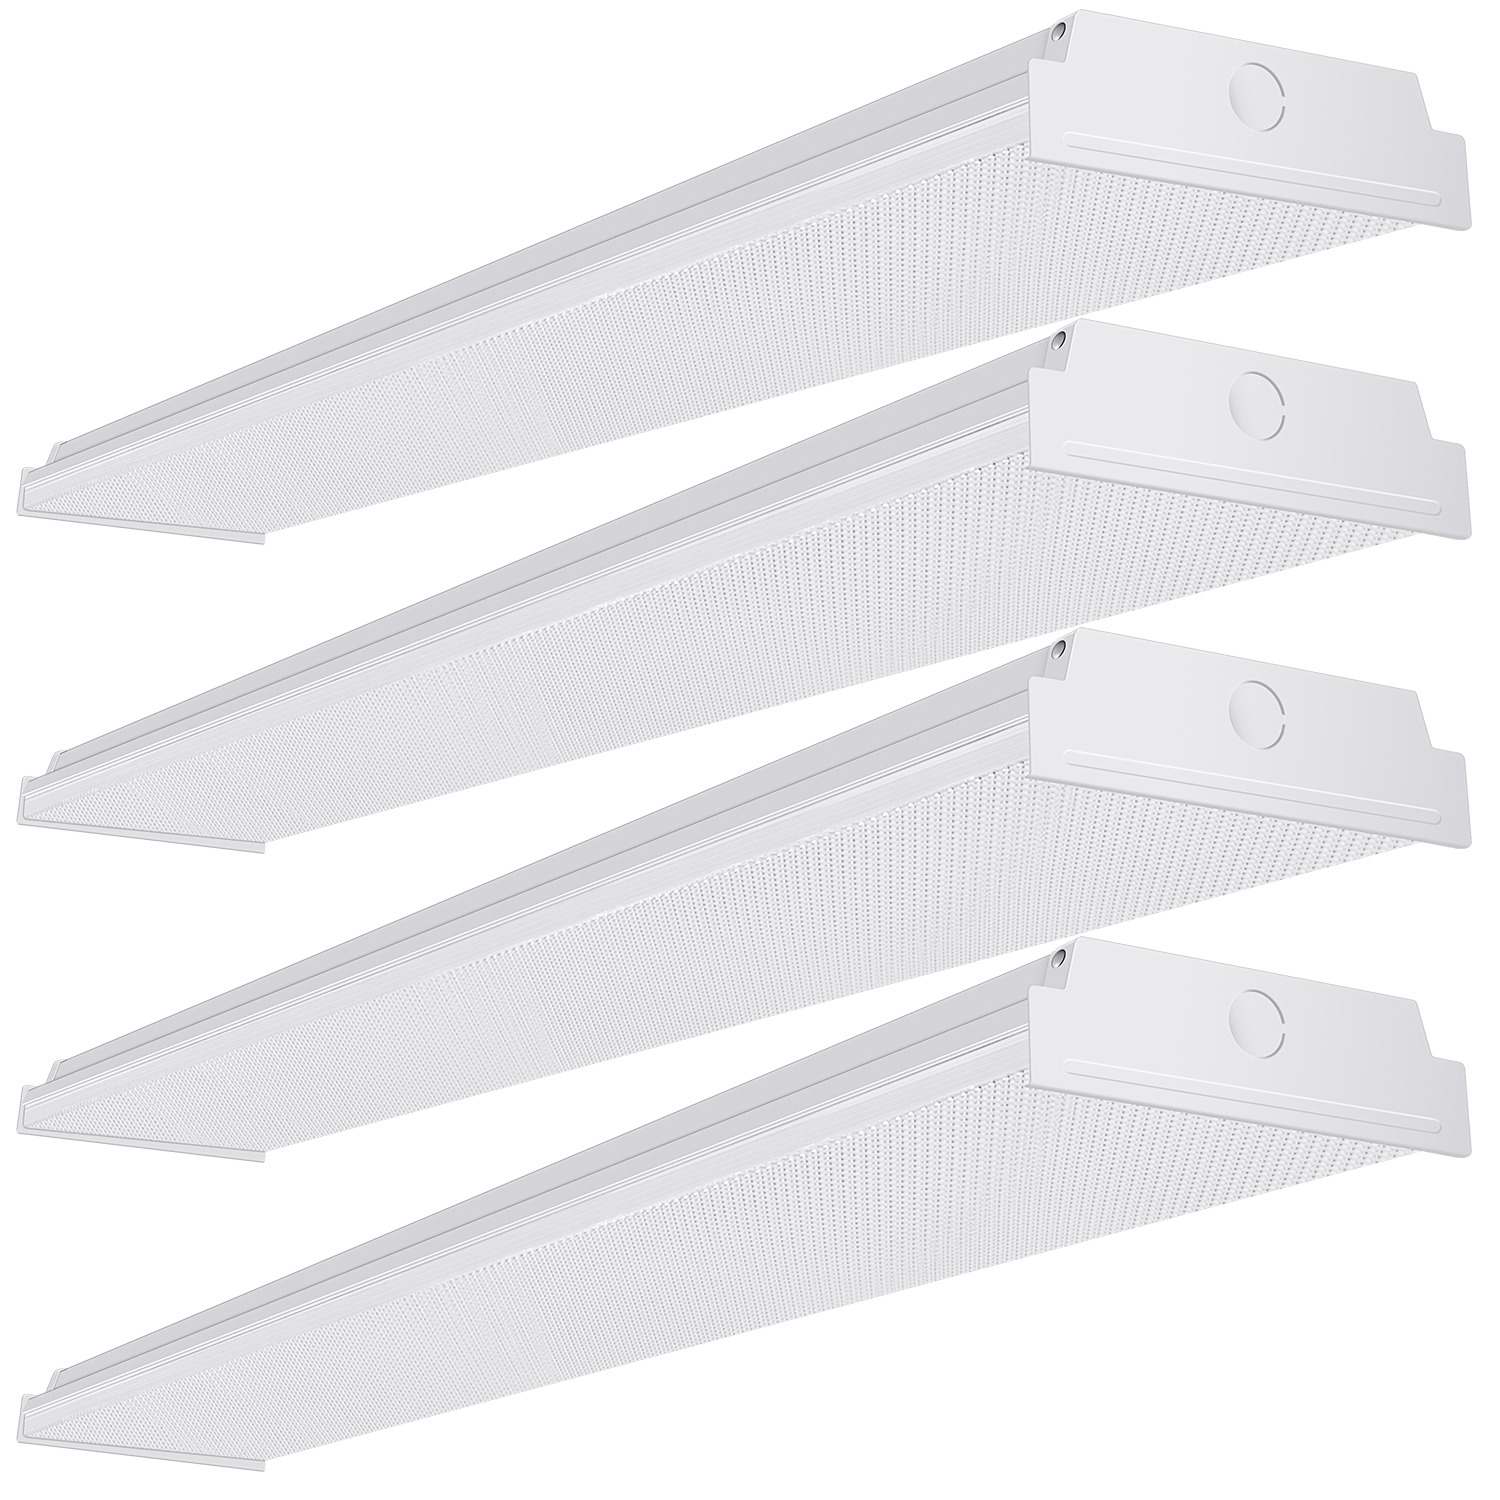 AntLux 4ft LED Garage Lights LED Wraparound Light Fixture, 50W 5500LM, 4000K  Neutral White, Integrated Low Profile Linear Flush Mount Ceiling Lighting,  128W Fluorescent Tube Replacement, Pack